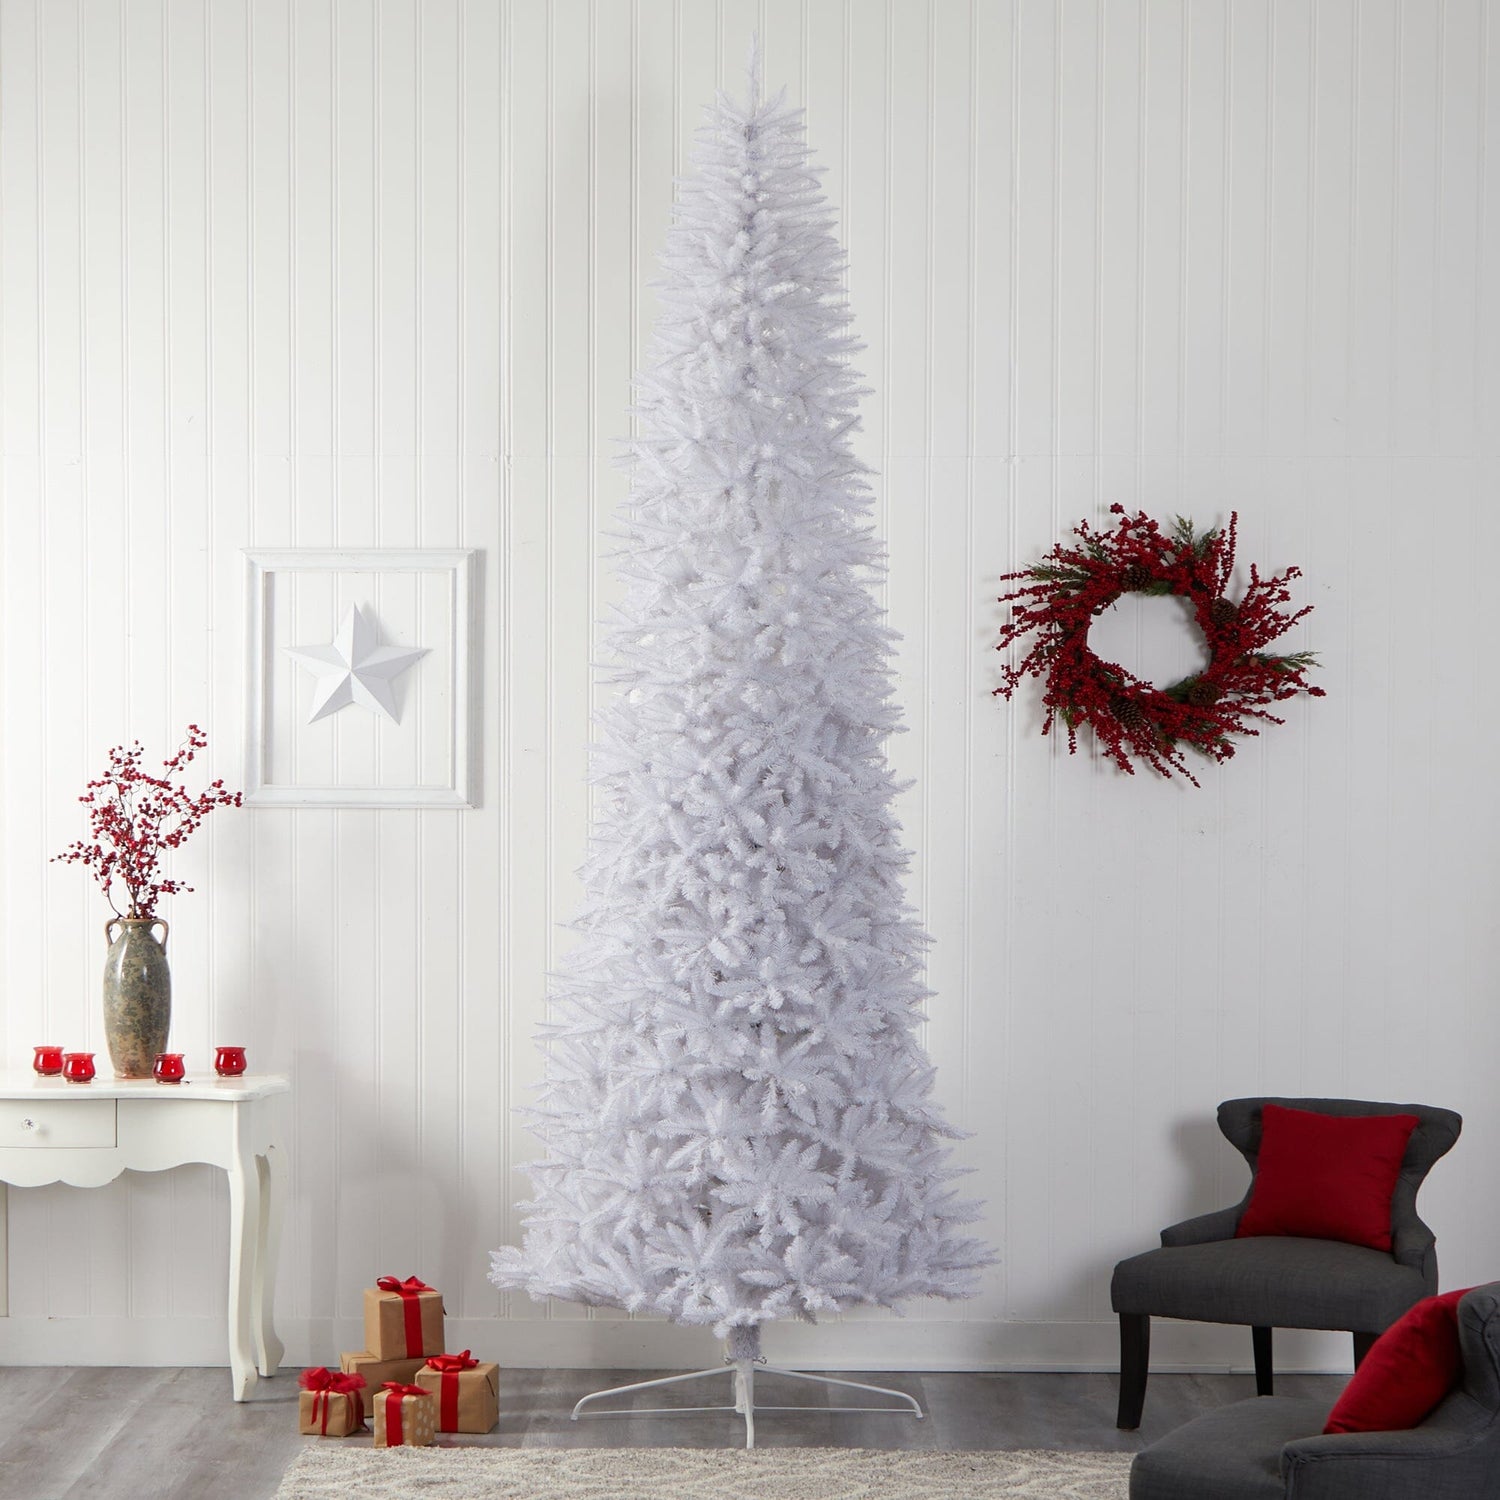 12’ Slim White Artificial Christmas Tree with 3235 Bendable Branches